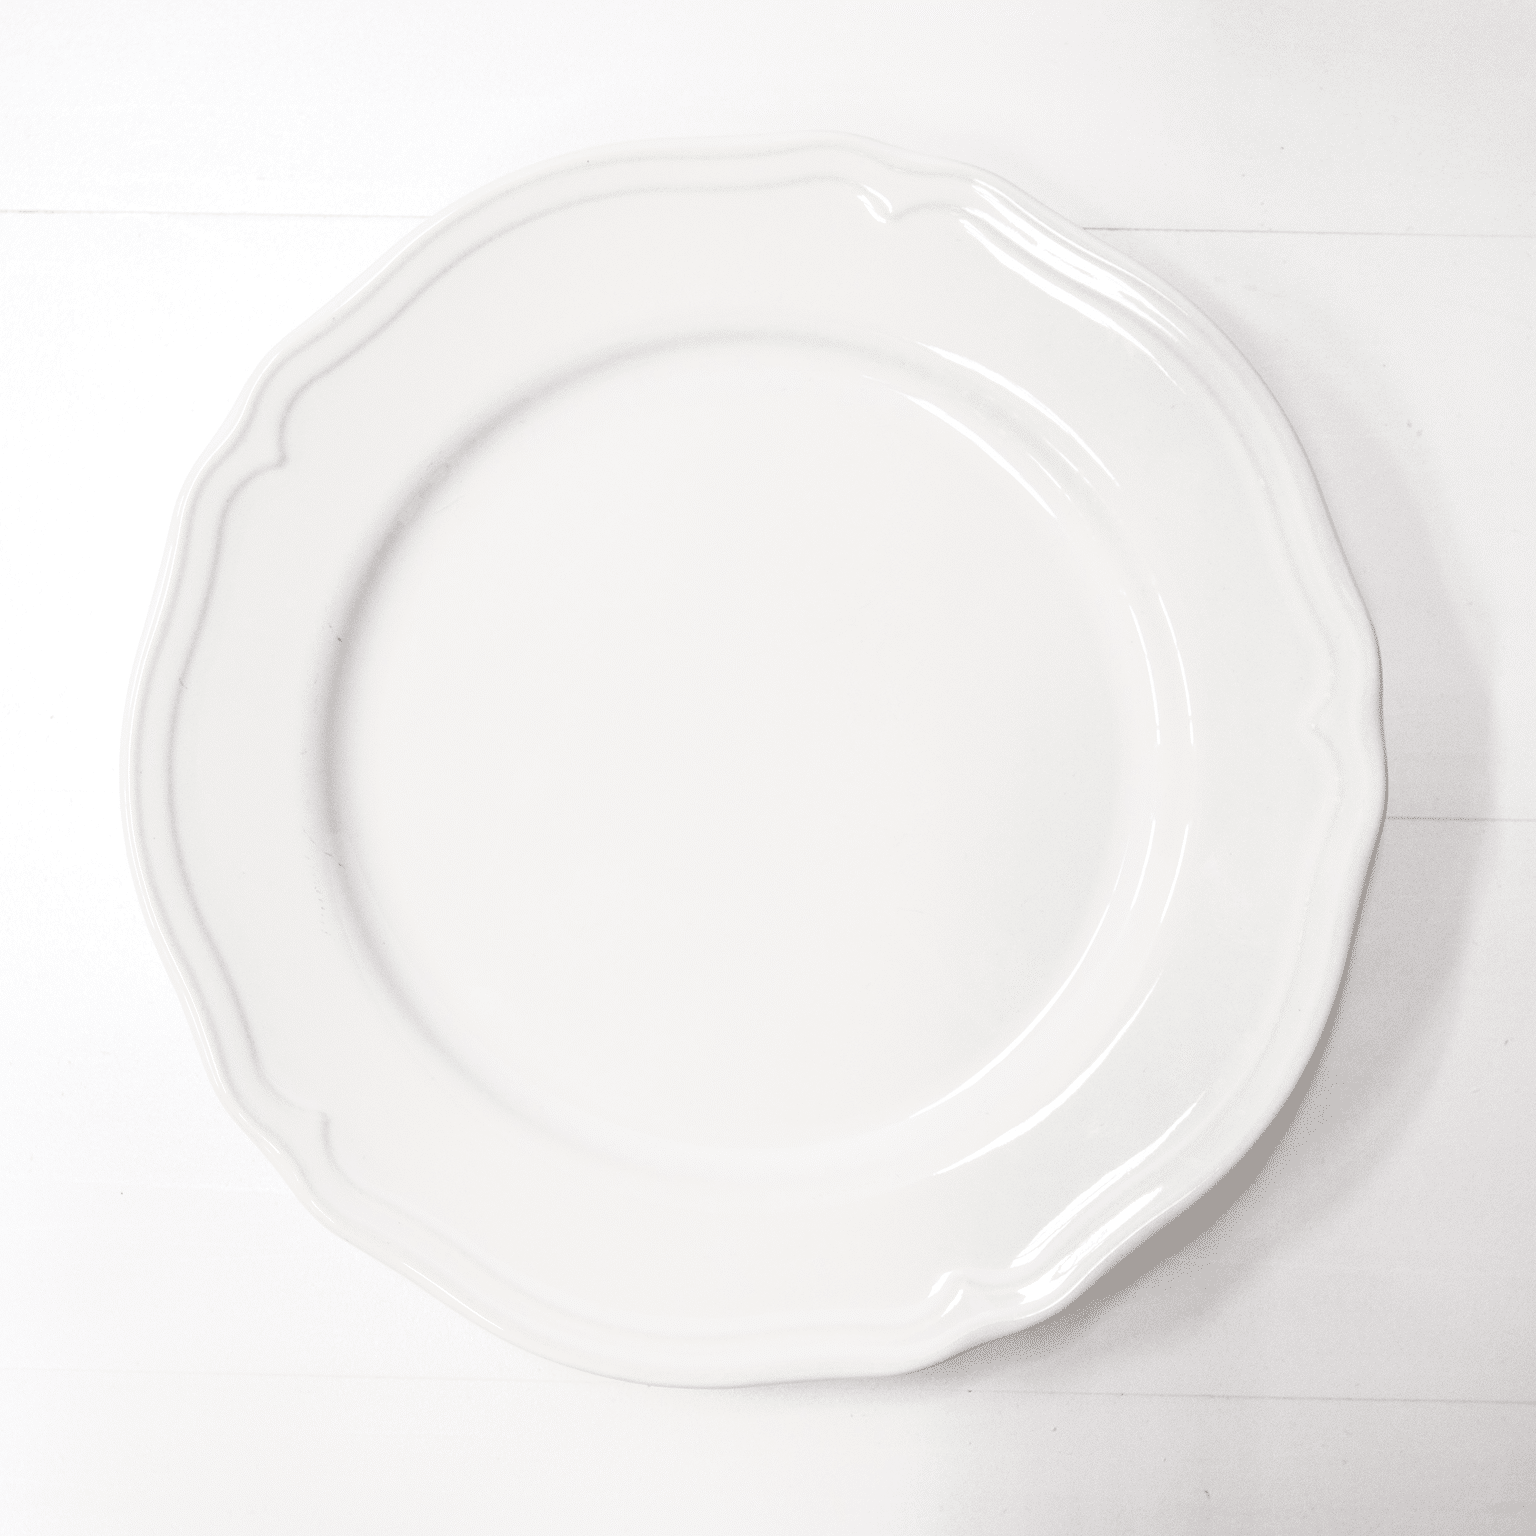 FrenchStyleDinnerPlate_preview.png